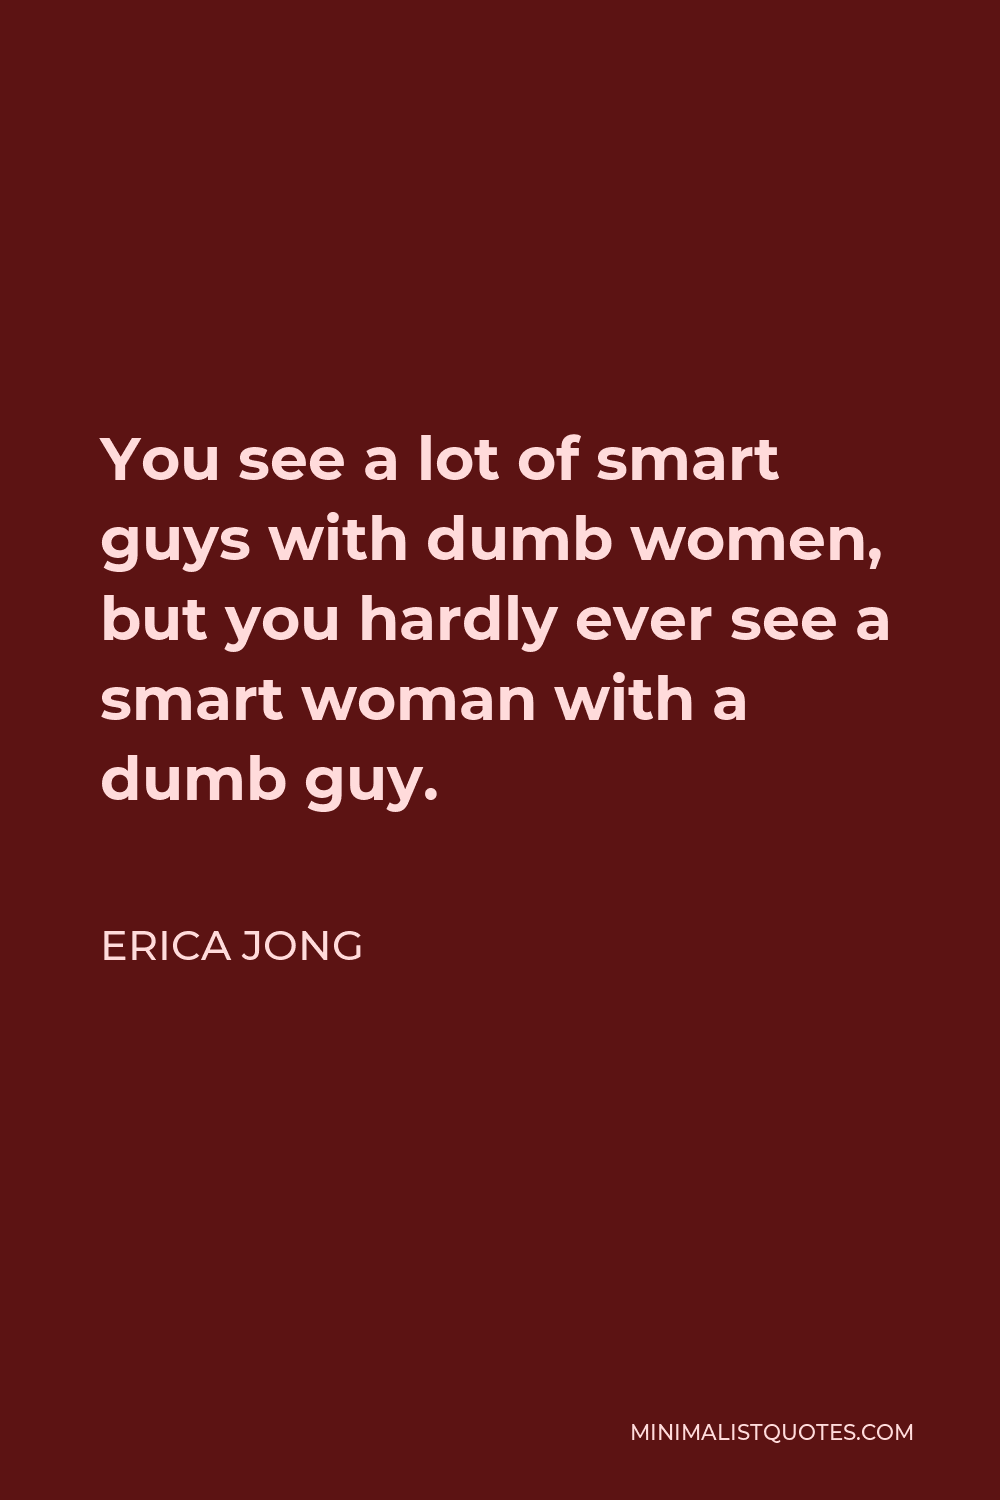 Erica Jong Quote - You see a lot of smart guys with dumb women, but you hardly ever see a smart woman with a dumb guy.